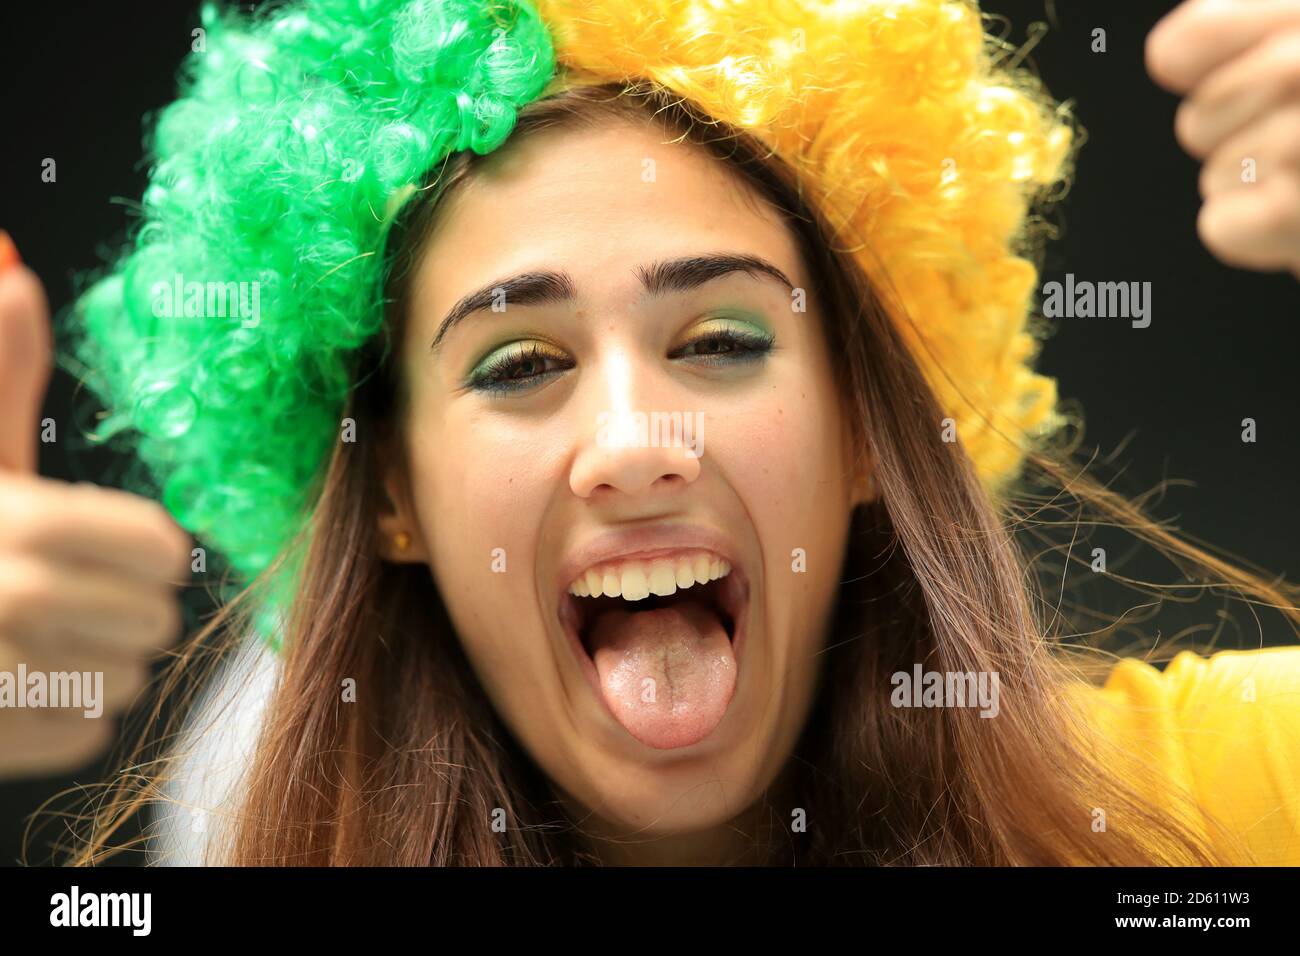 A Brazil fans shows her support ahead of the match Stock Photo